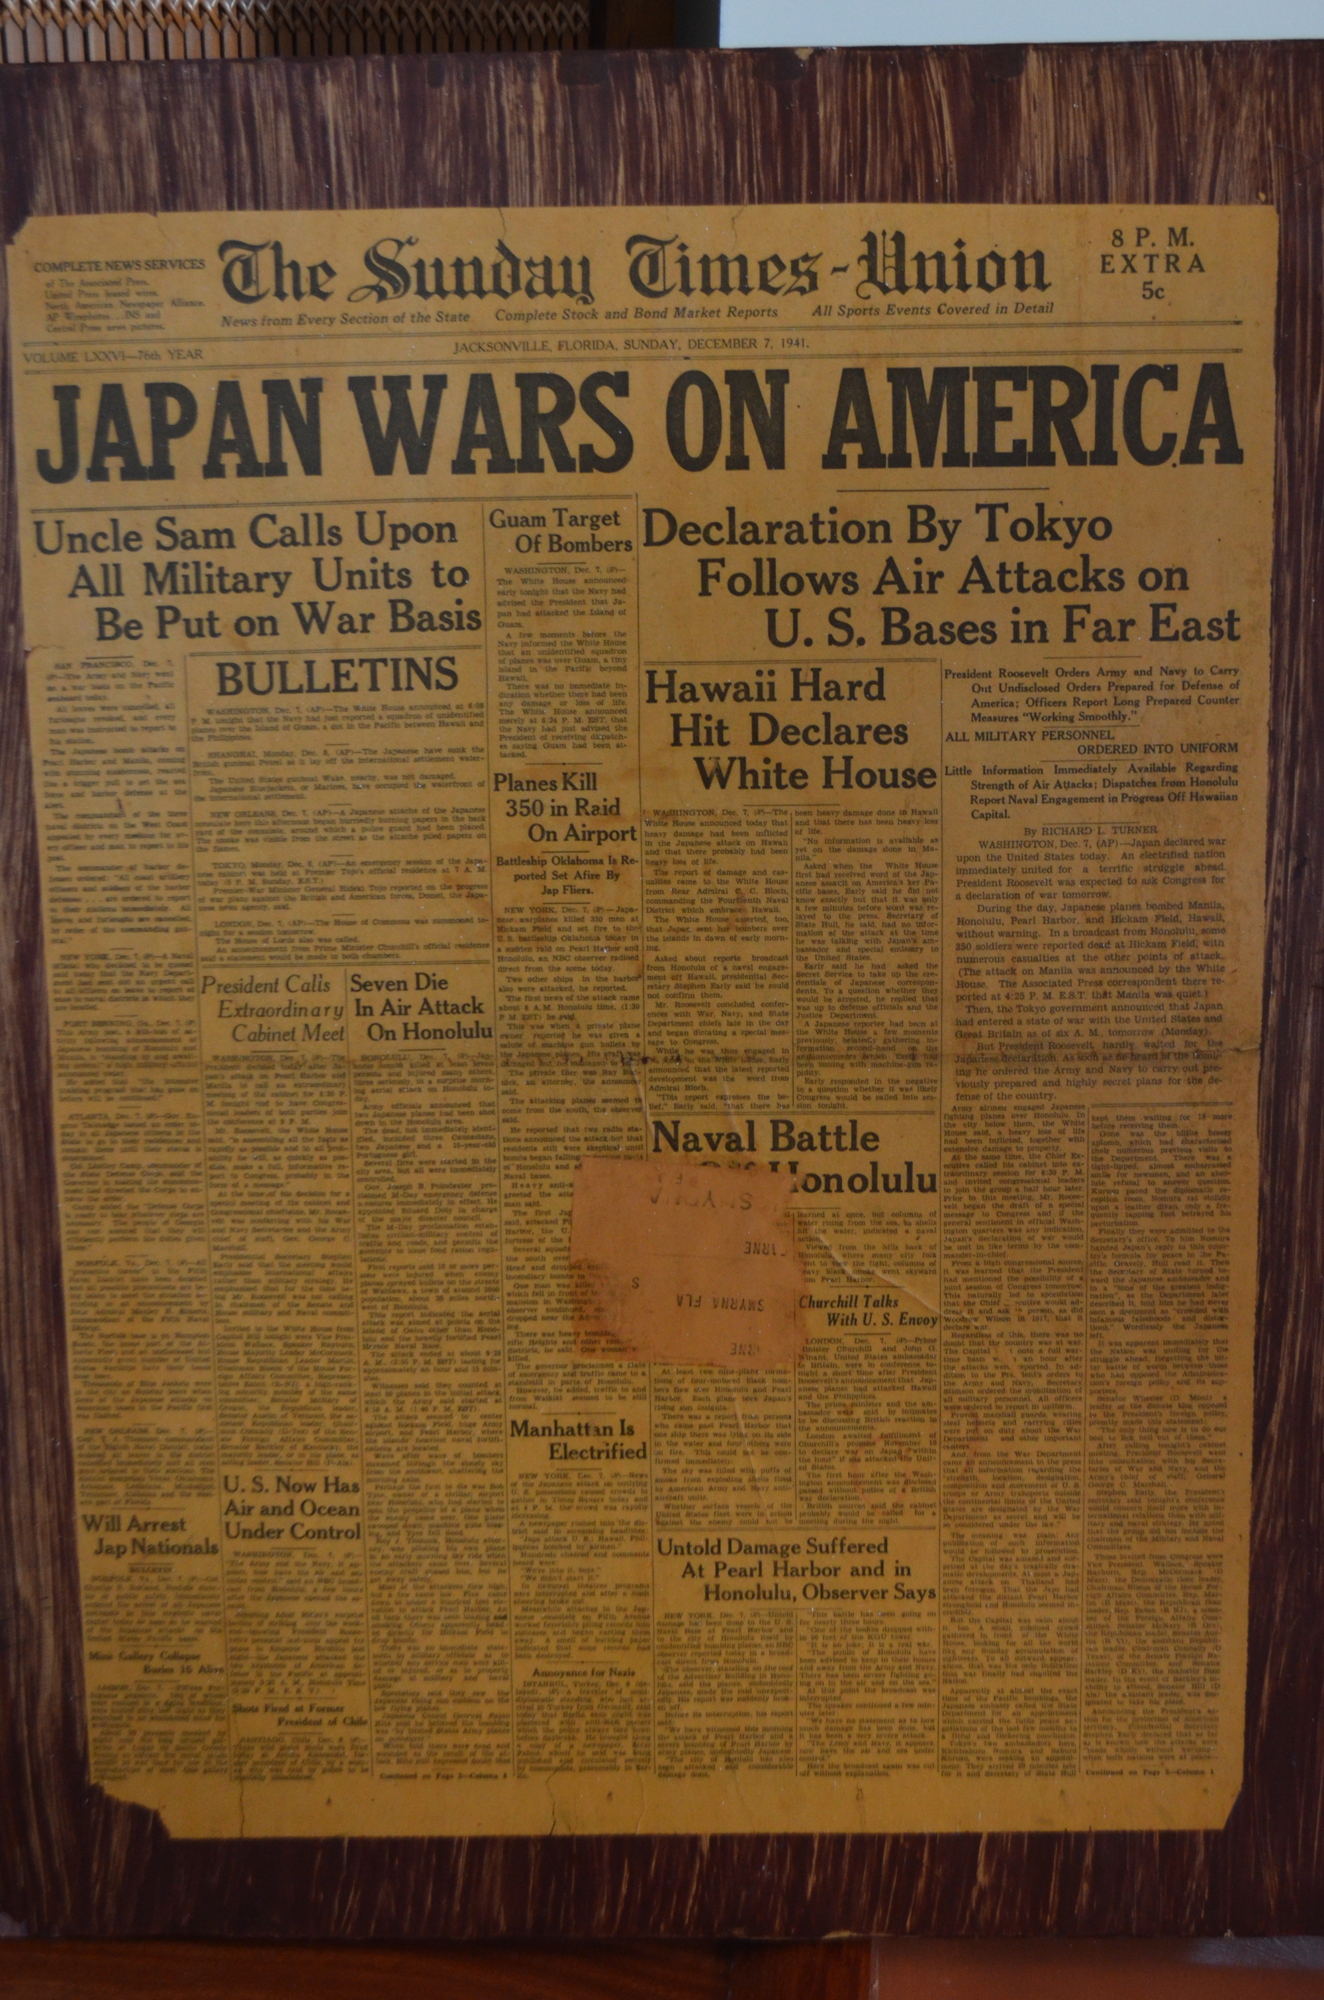 Shannon Gault has a copy of the front page from the Jacksonville newspaper dated Dec. 7, 1941.